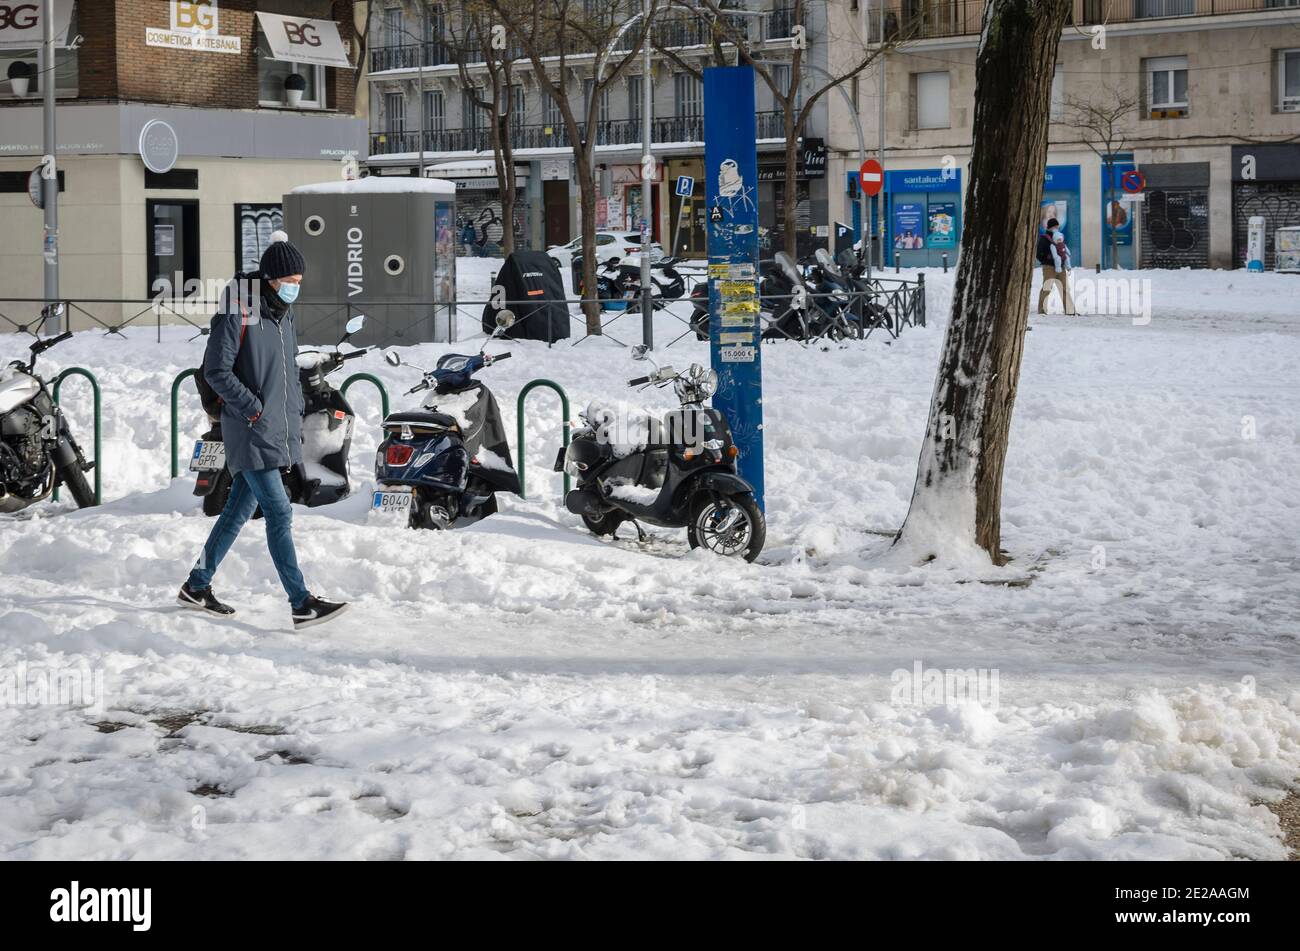 Madrid, Spain. 10 th January 2021. View of a man in San Bernardo street, Chamberi quarter, after the snow storm. Credit: Enrique Davó. Stock Photo